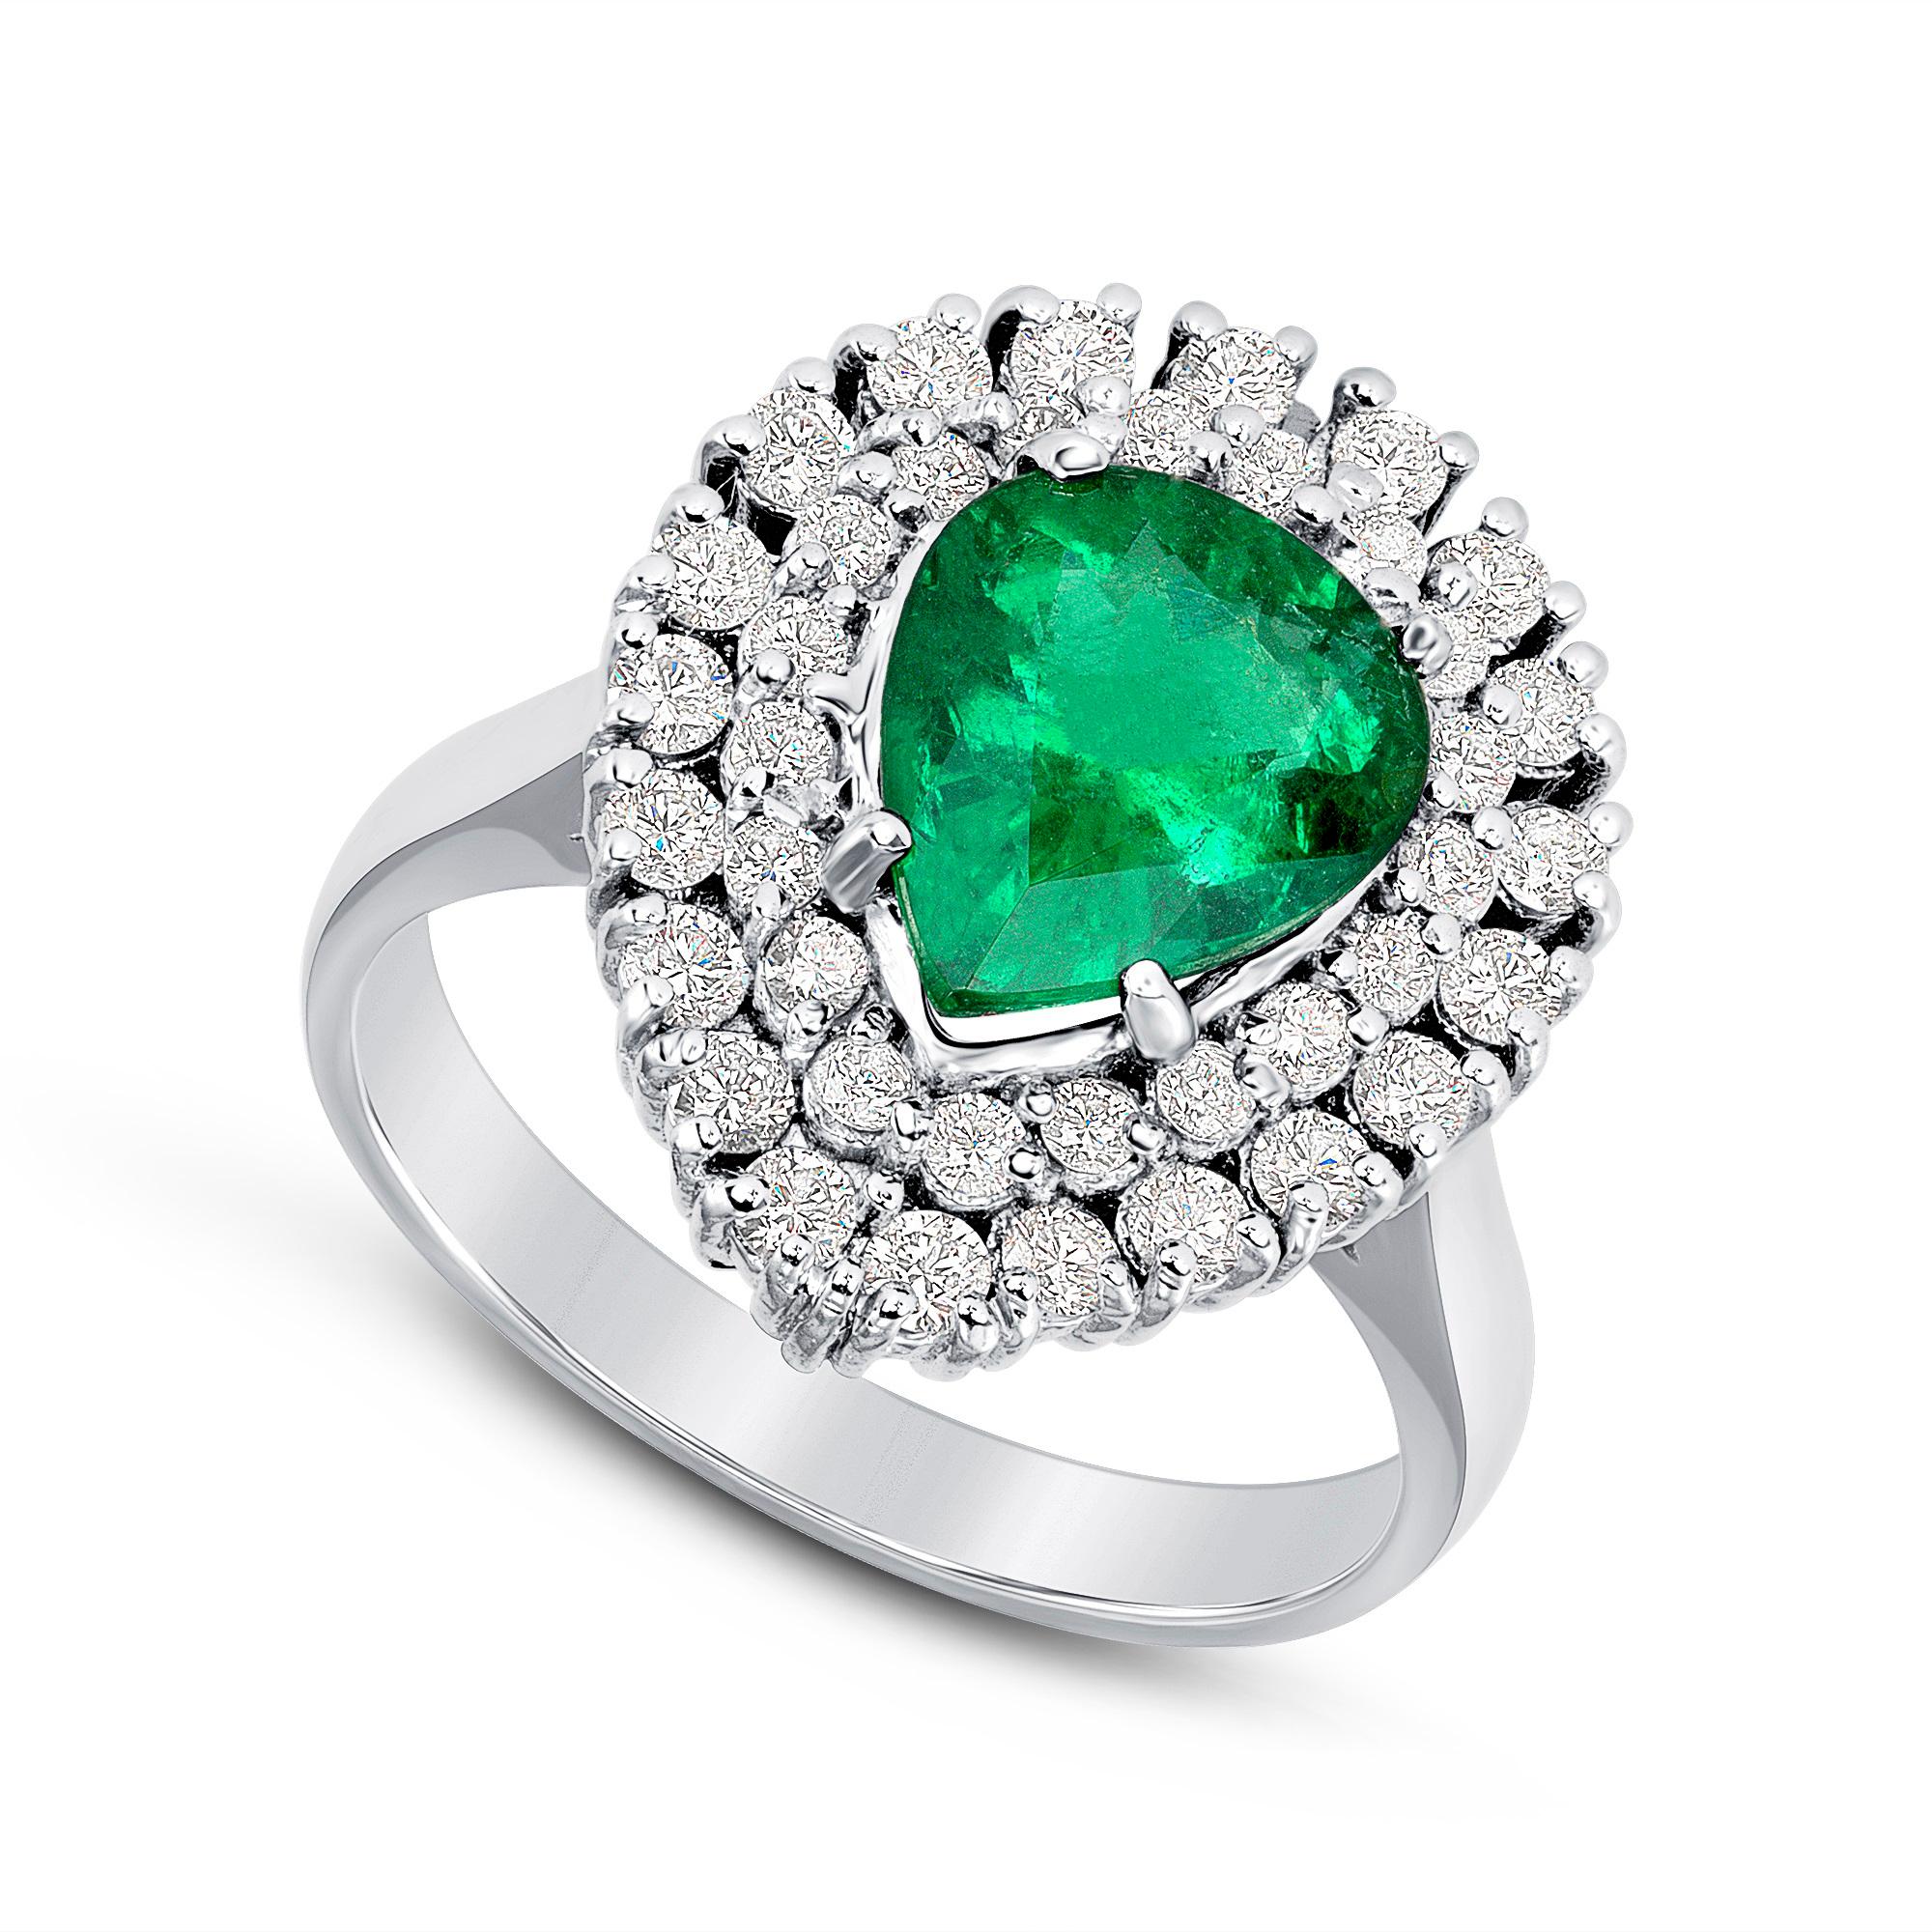 NATURAL Emerald 1.78ct / Diamond 0.82ct E-F Color VS Quality very well cut / 18K White Gold 6.3gm #GVR1682
This exquisite 1.78ct Emerald cut glows like a clear mountain lake as the light plays over it. This Pear-shaped Emerald is believed to help